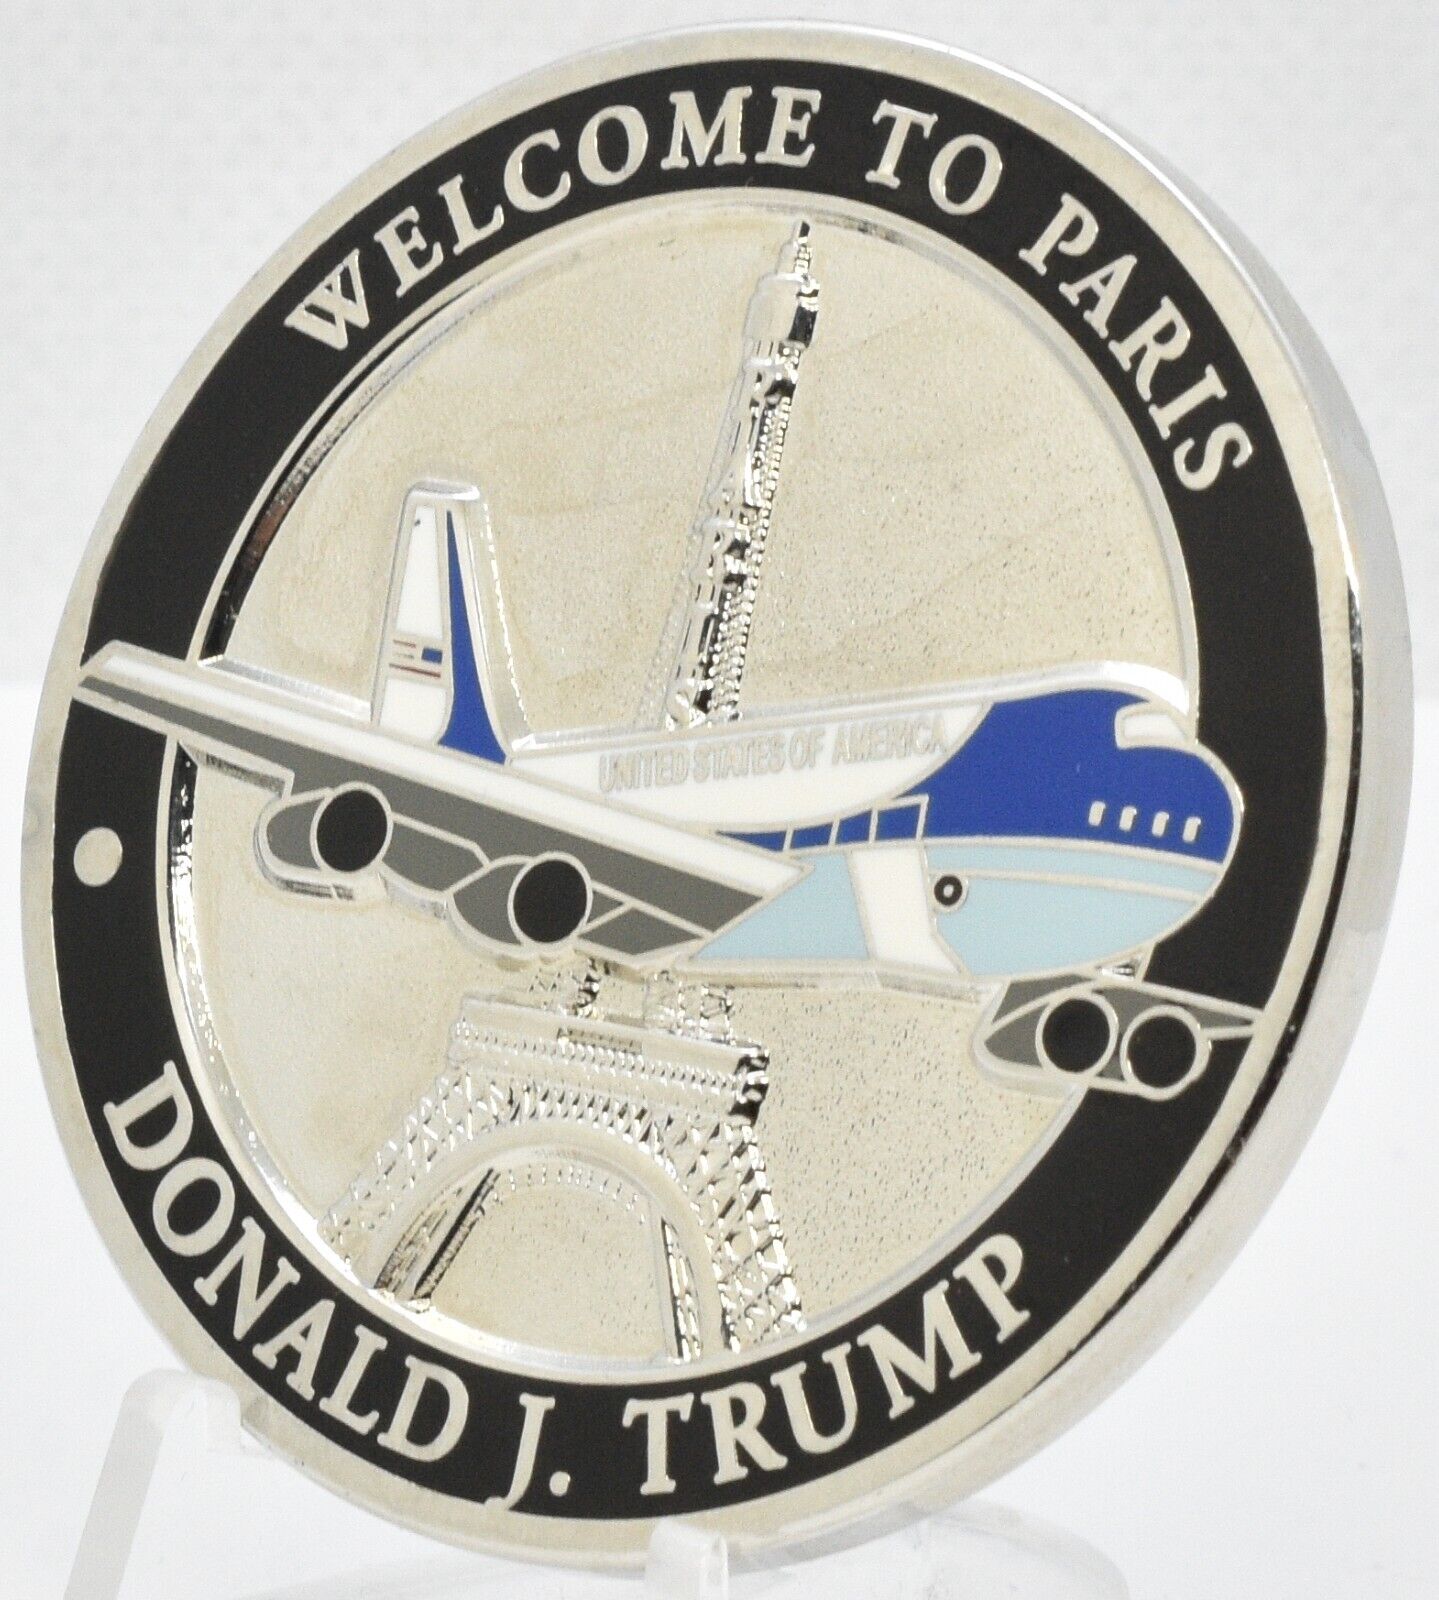 Welcome To Paris France President Donald Trump Visit Trip Challenge Coin